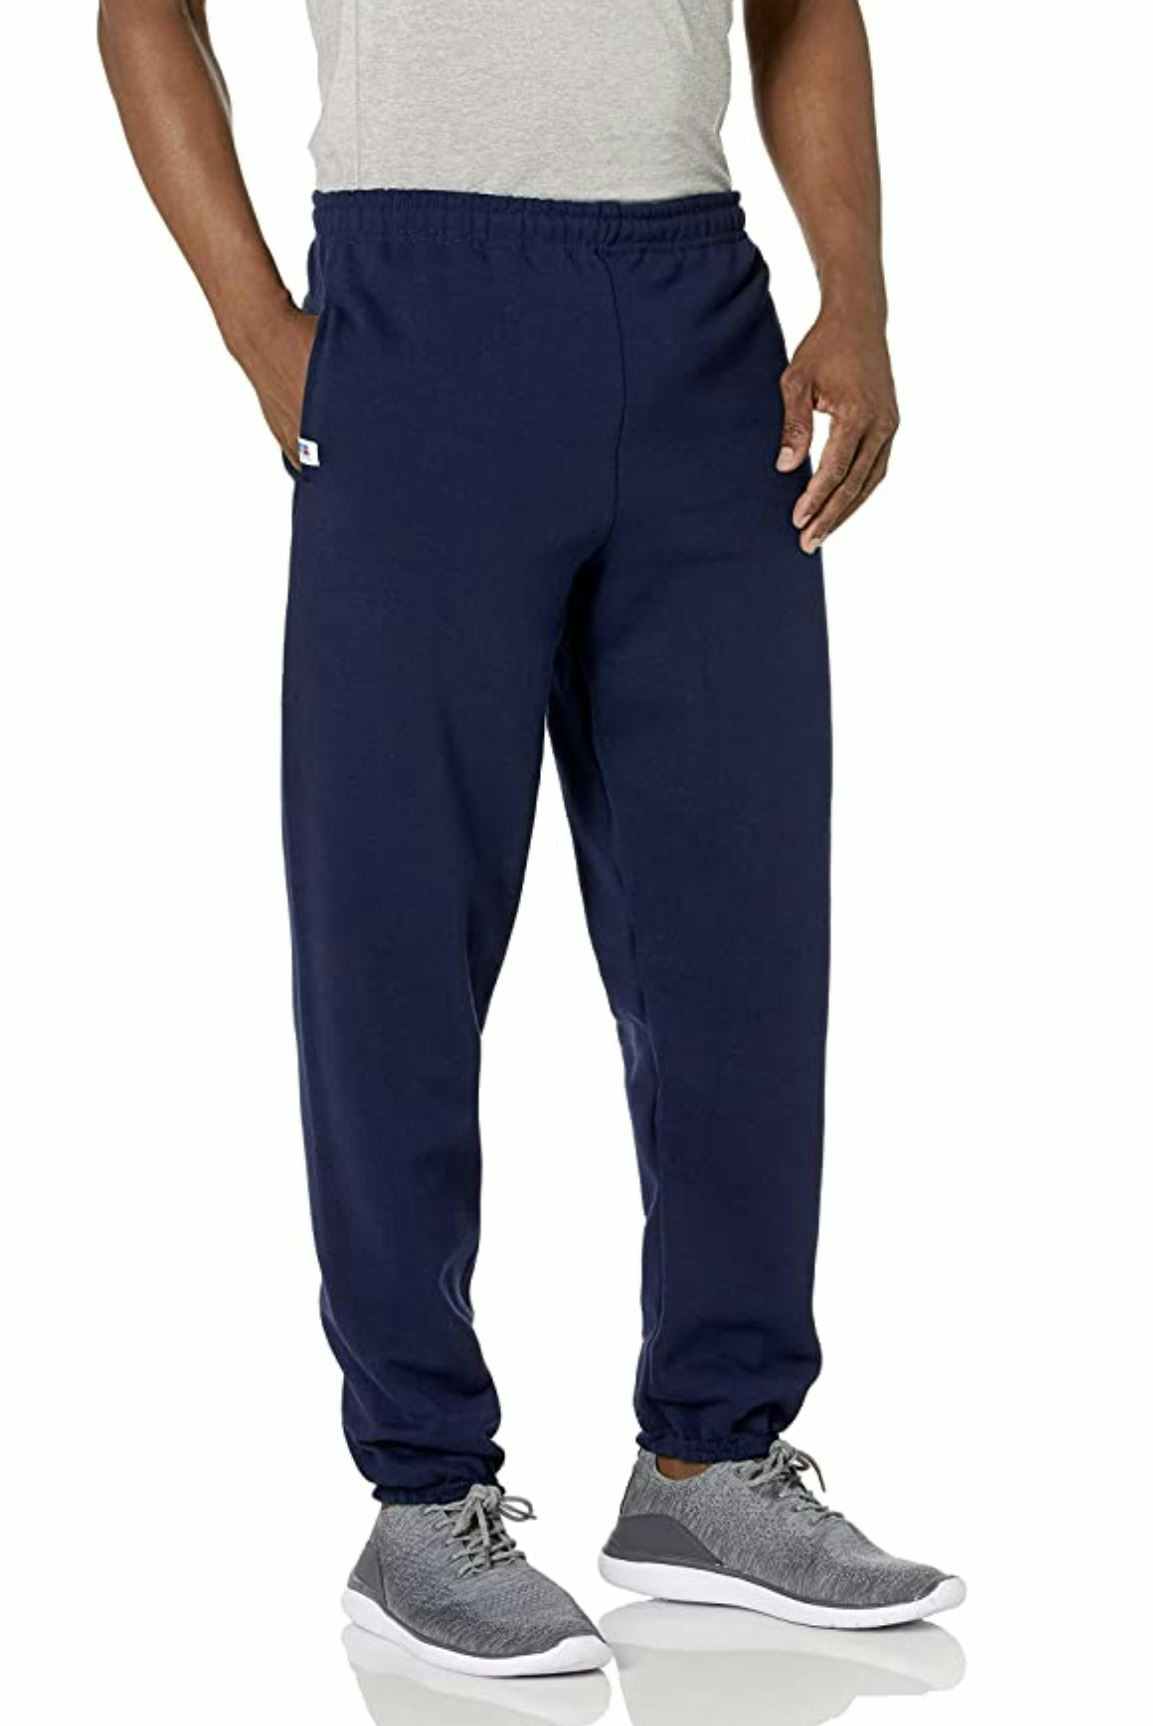 A man wearing blue Russell Athletic sweatpants.